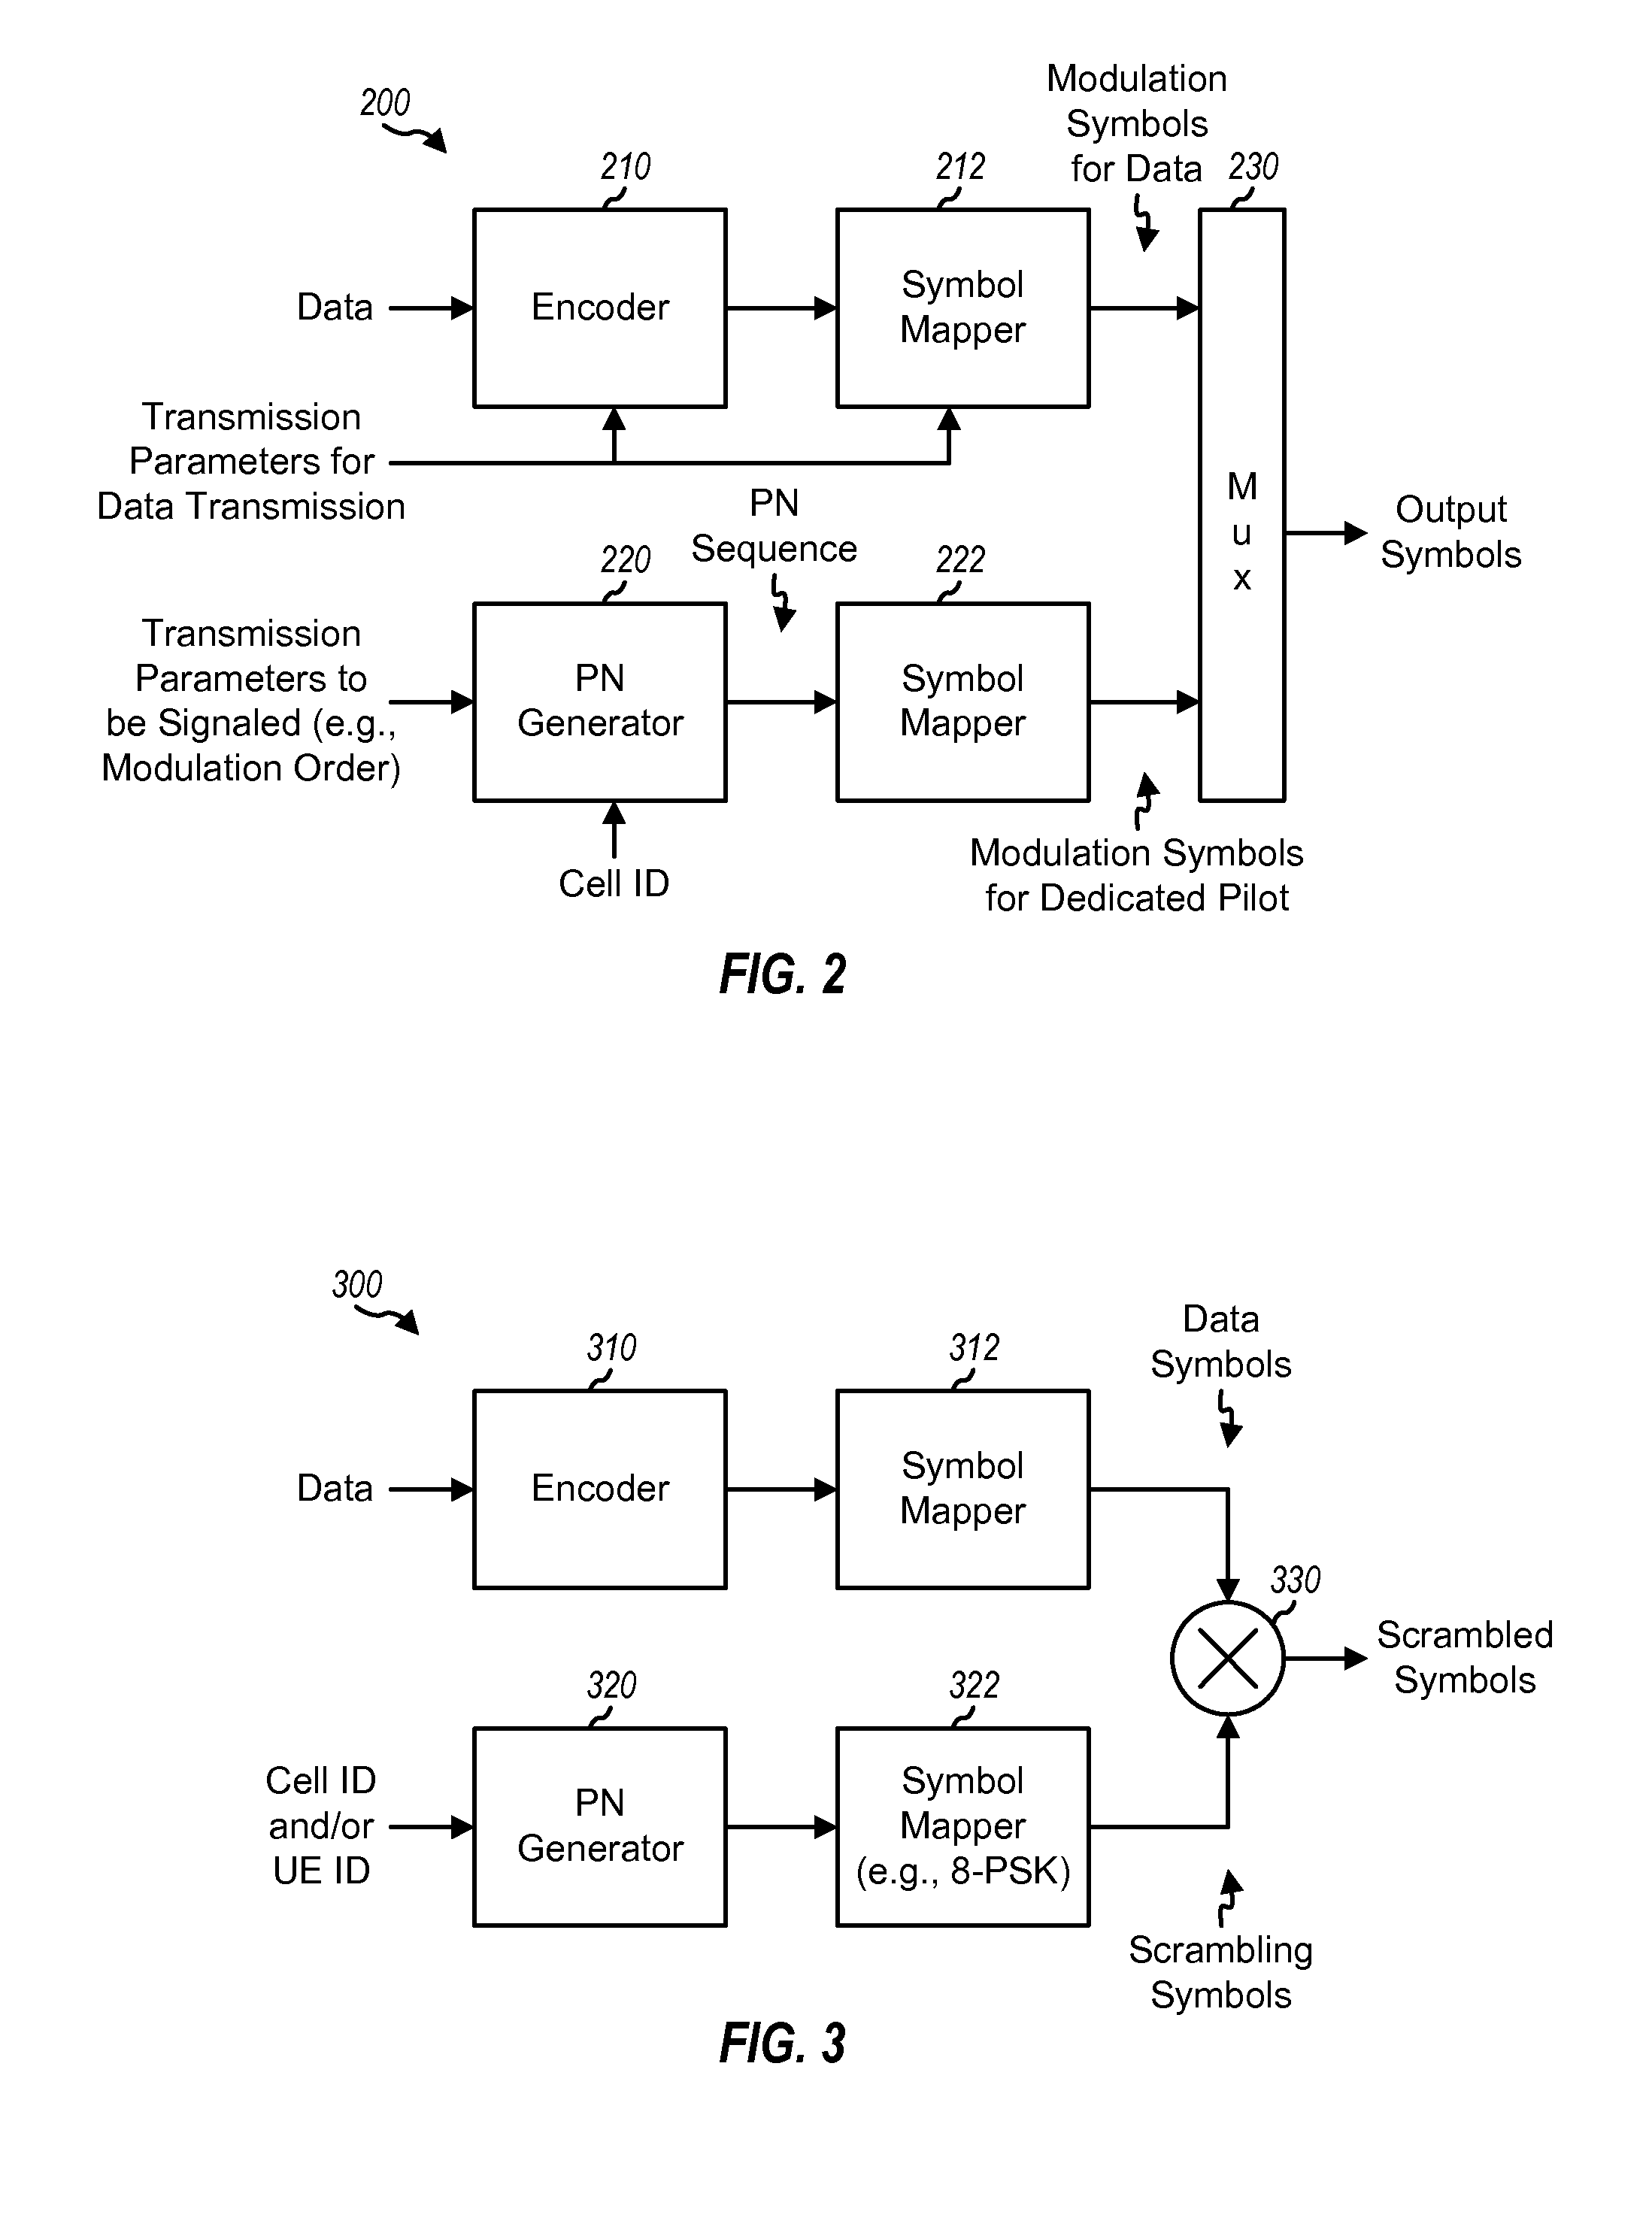 Interference mitigation for downlink in a wireless communication system